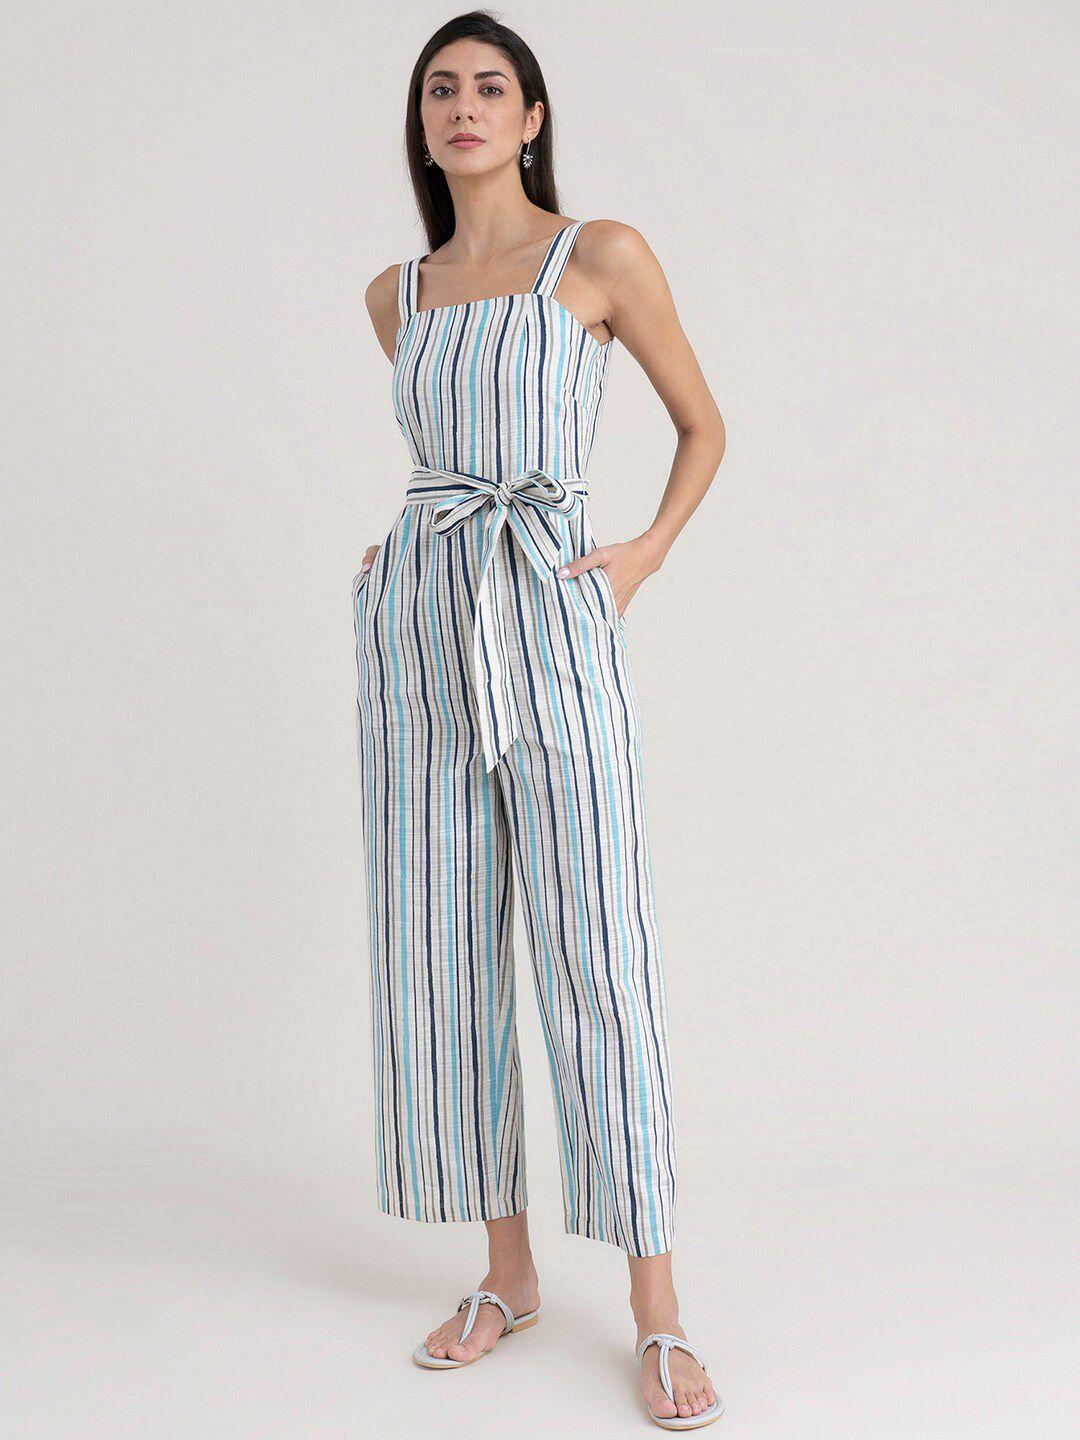 marigold by fablestreet white & blue striped basic jumpsuit